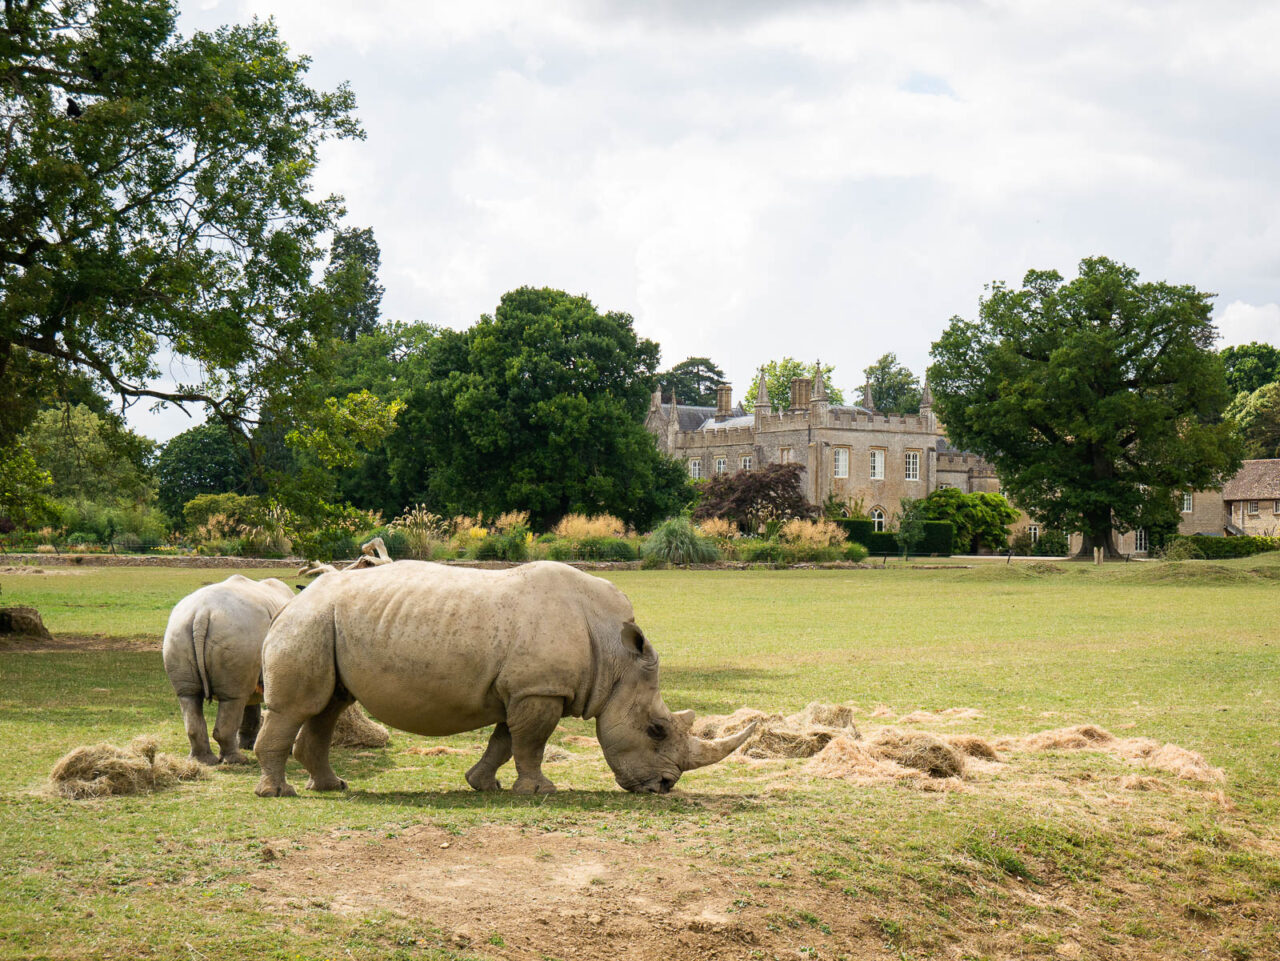 Rhinos grazing on the lawn at Cotswold Wildlife Park and Gardens